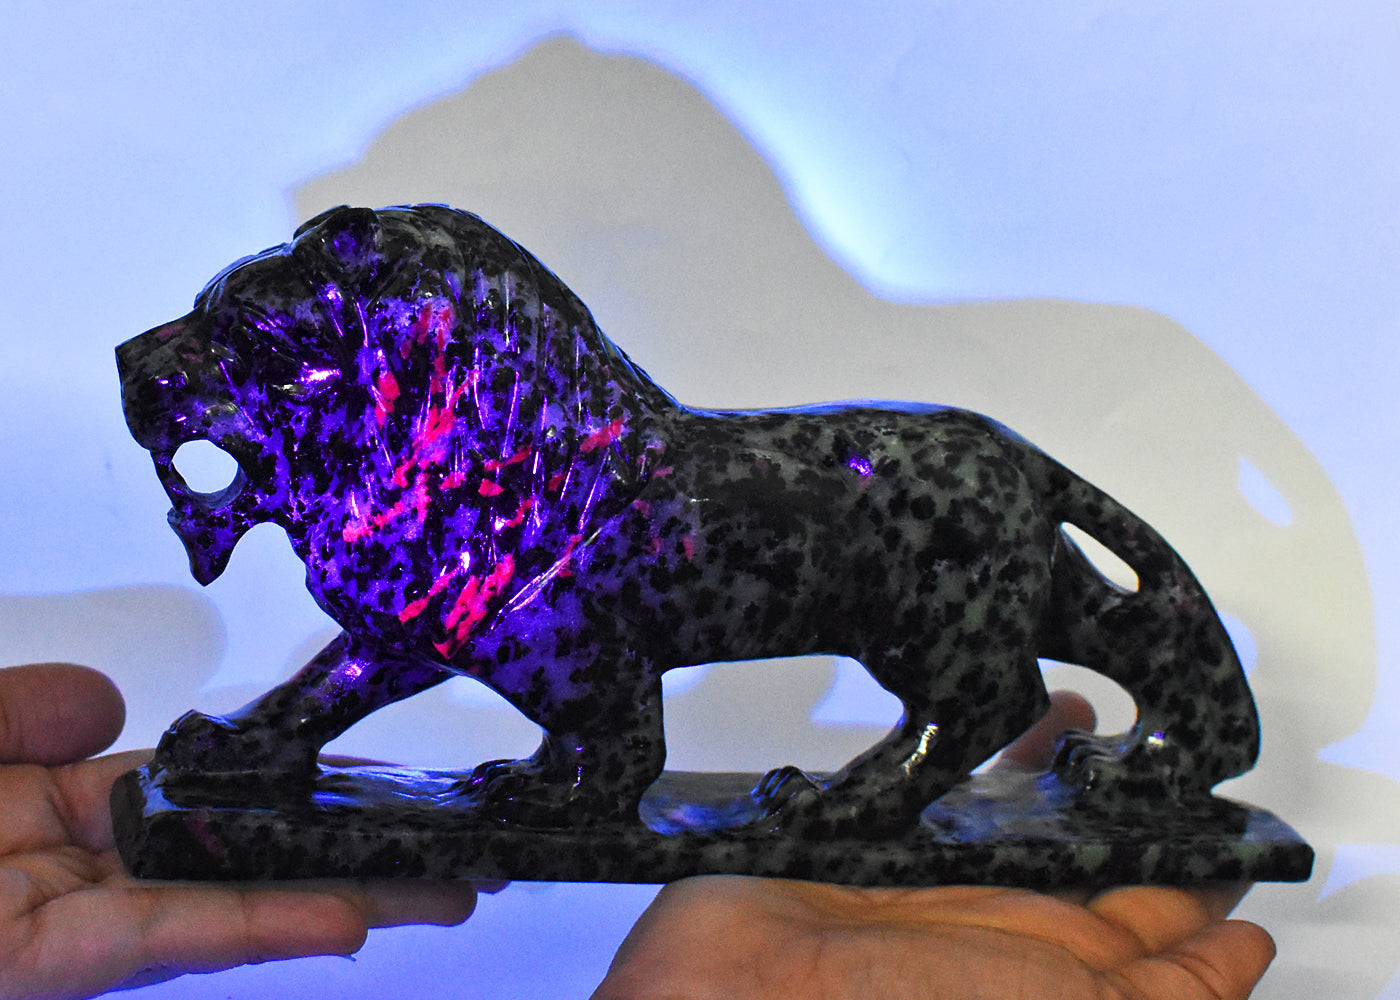 Artisian  6040.00 Carats  Genuine Ruby Zoisite Hand Carved  Crystal Gemstone Carving Lion